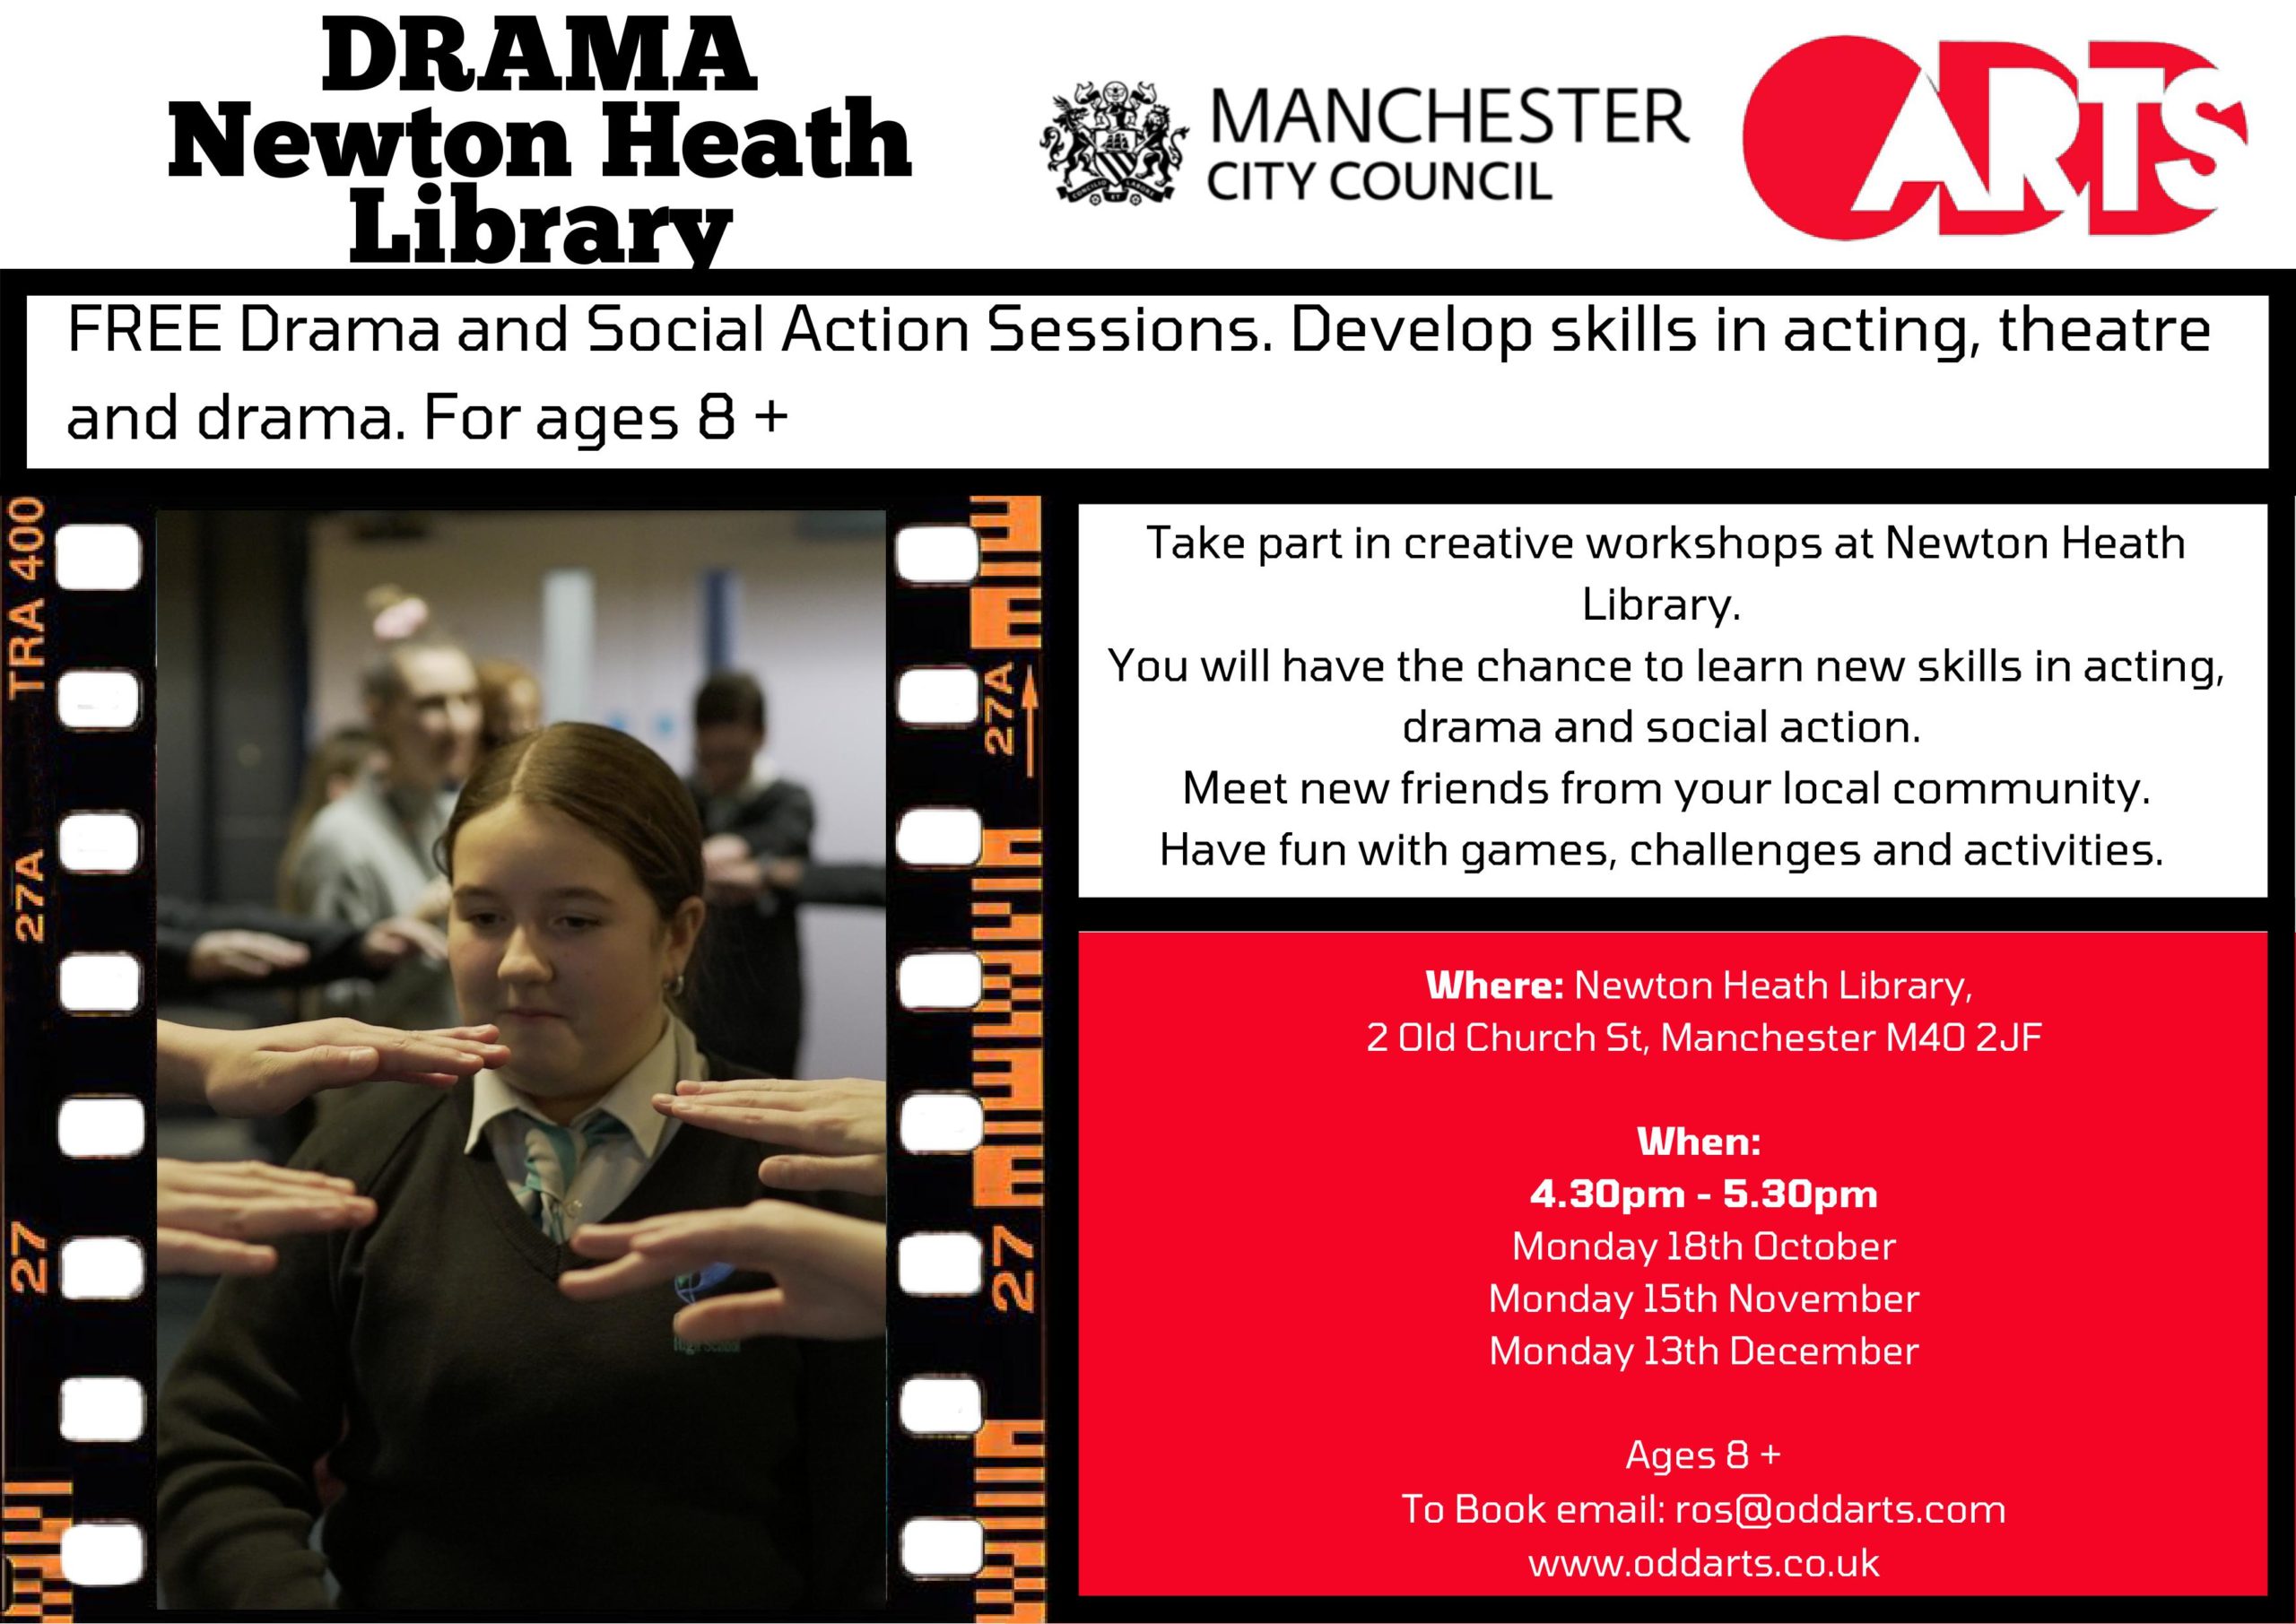 Drama and Social Action sessions at Newton Heath Library - develop...